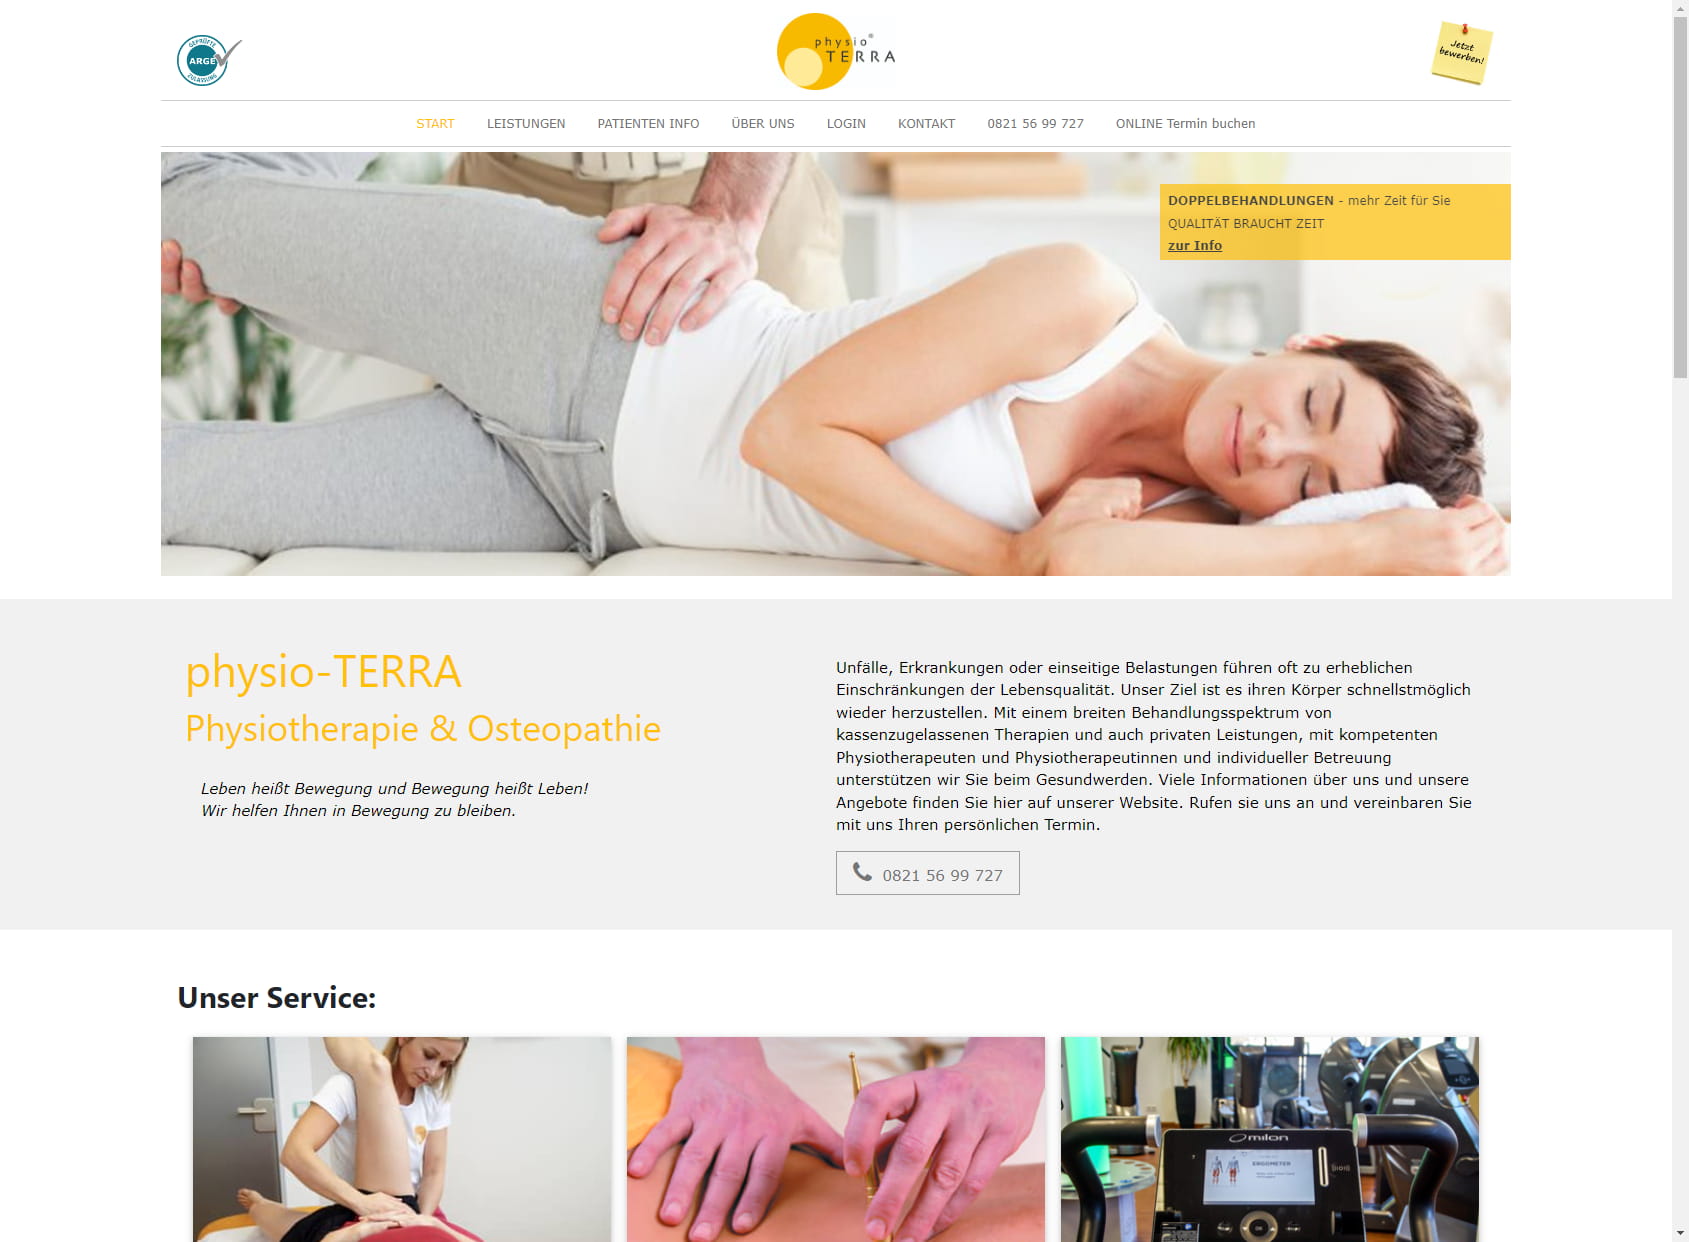 physio-TERRA GbR Physiotherapy & Osteopathy